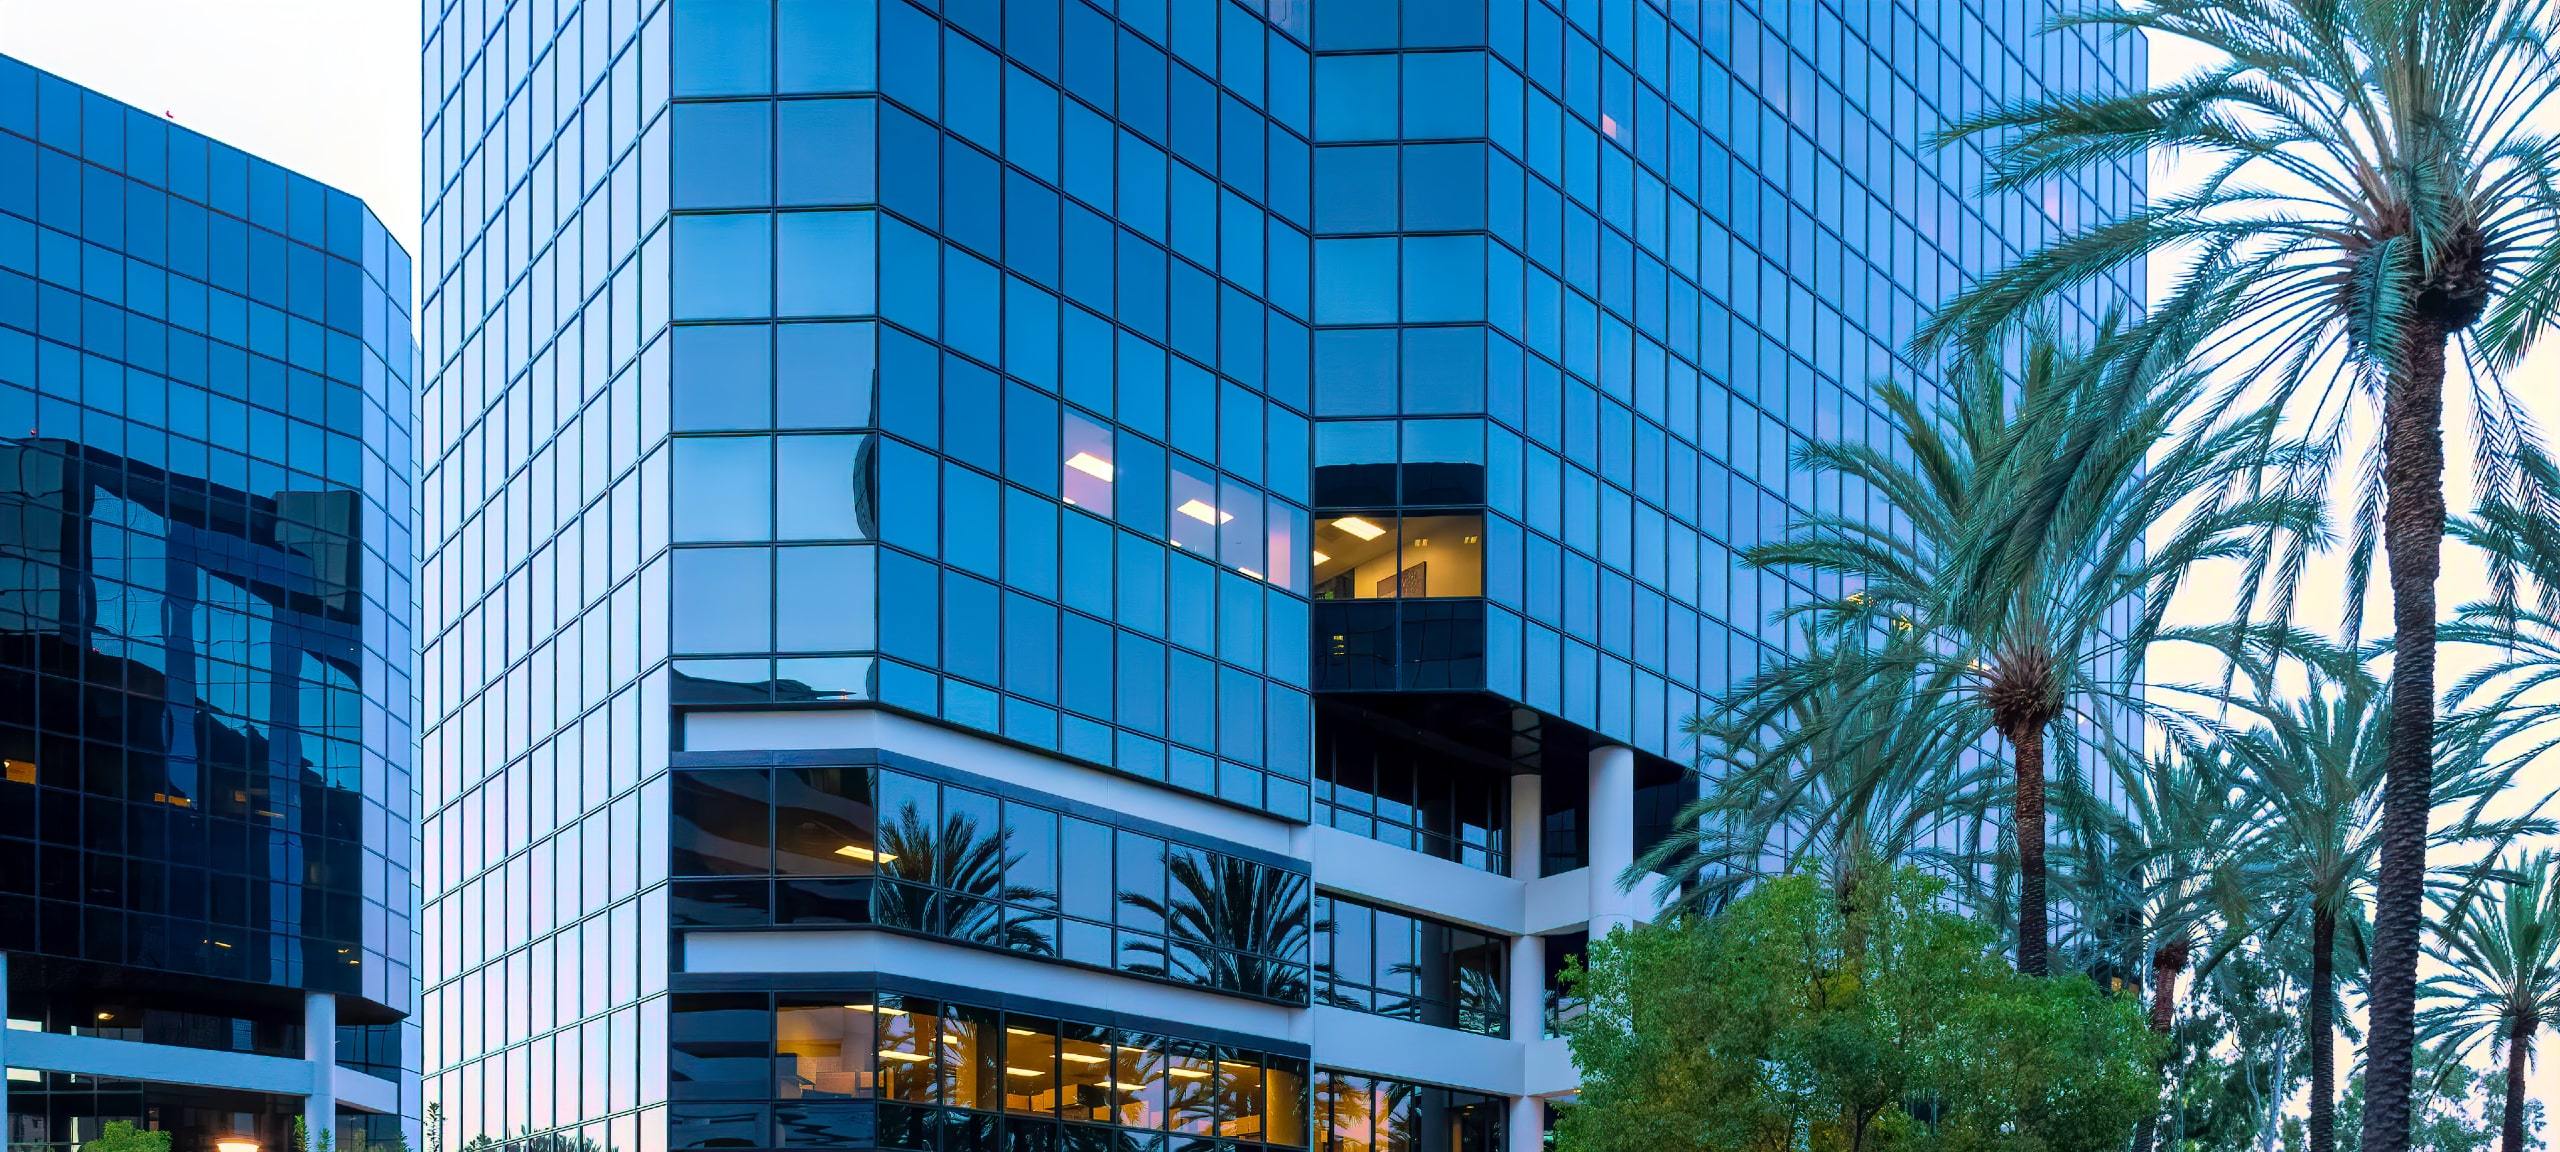 Modern downtown building in Irvine, CA at dusk